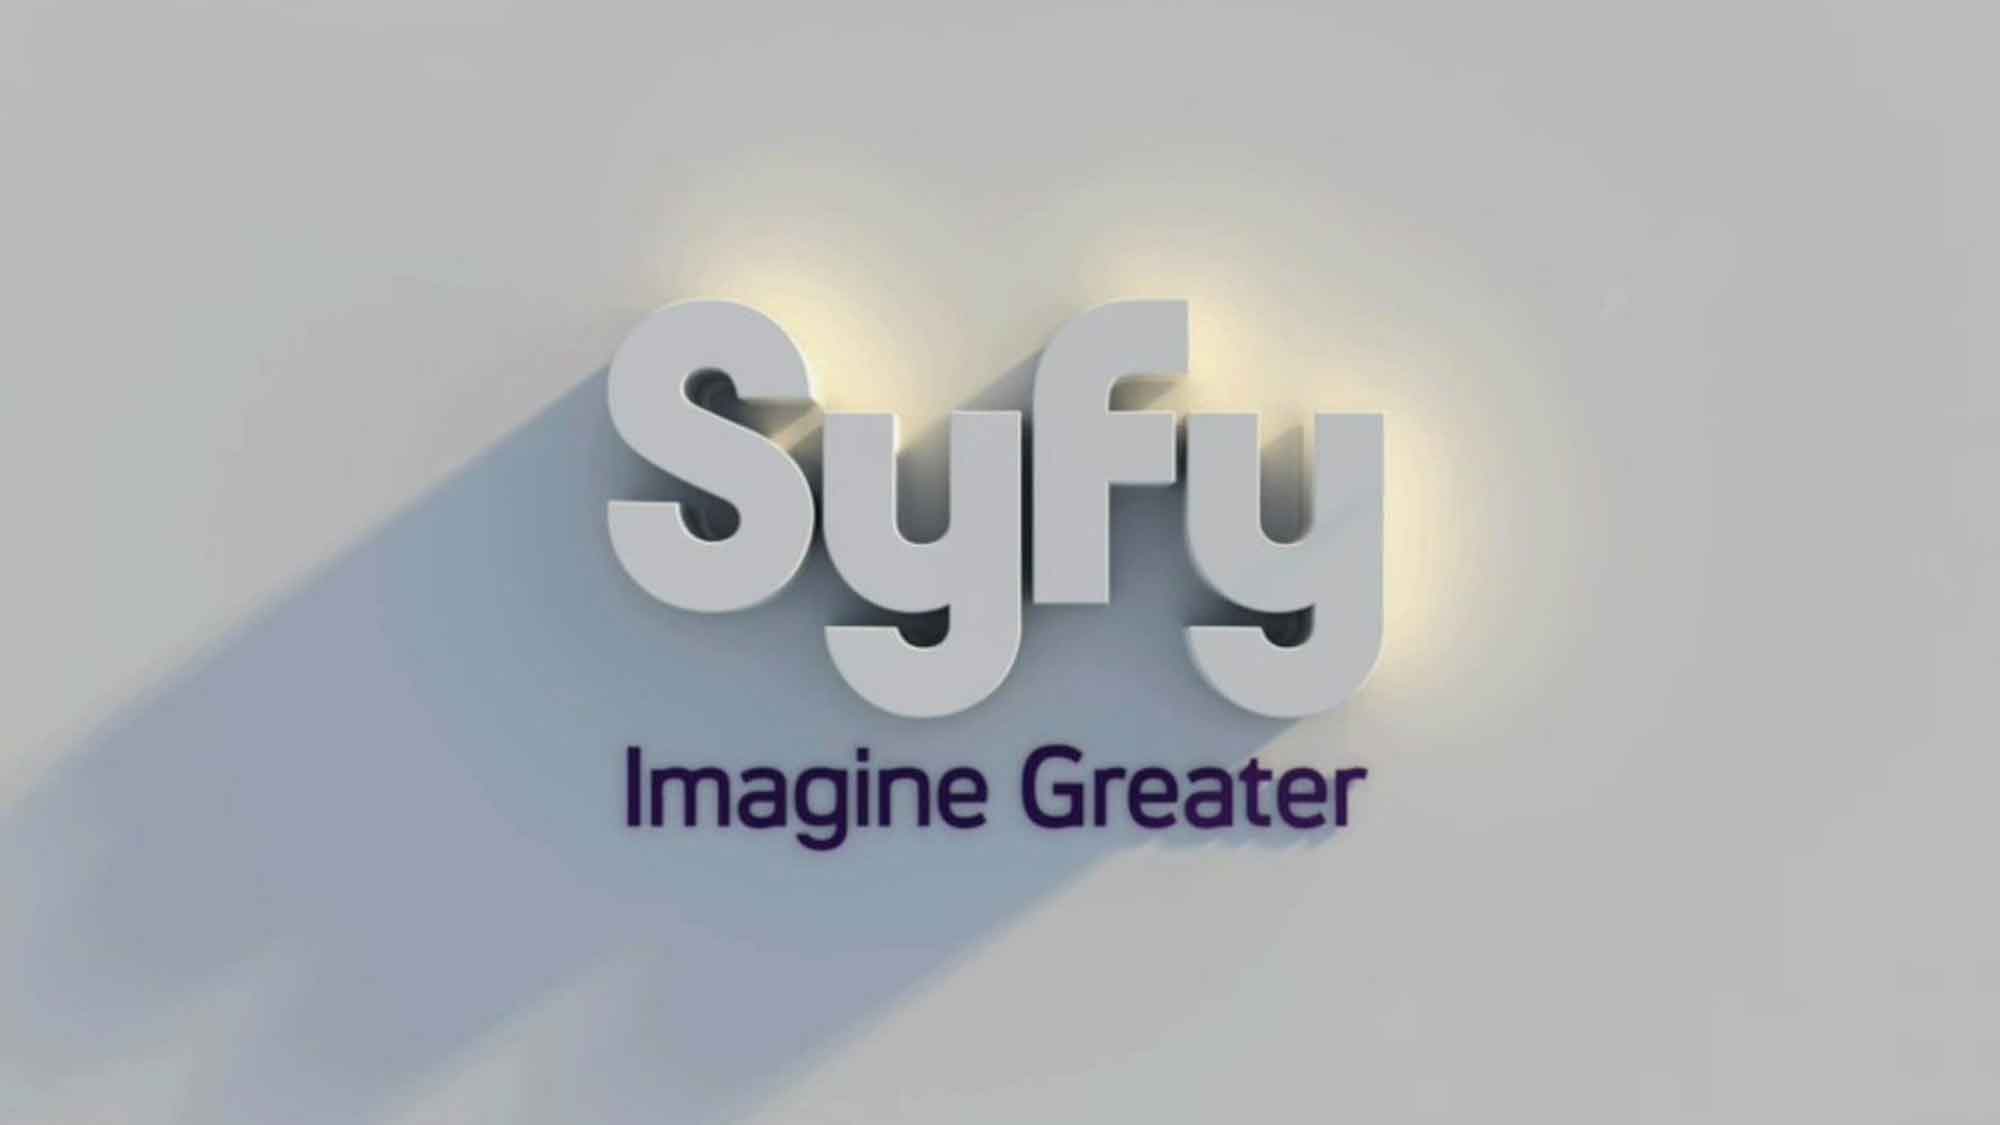 Why Is NBC Universal Rebranding The Sci Fi Channel To SyFy? (2009)